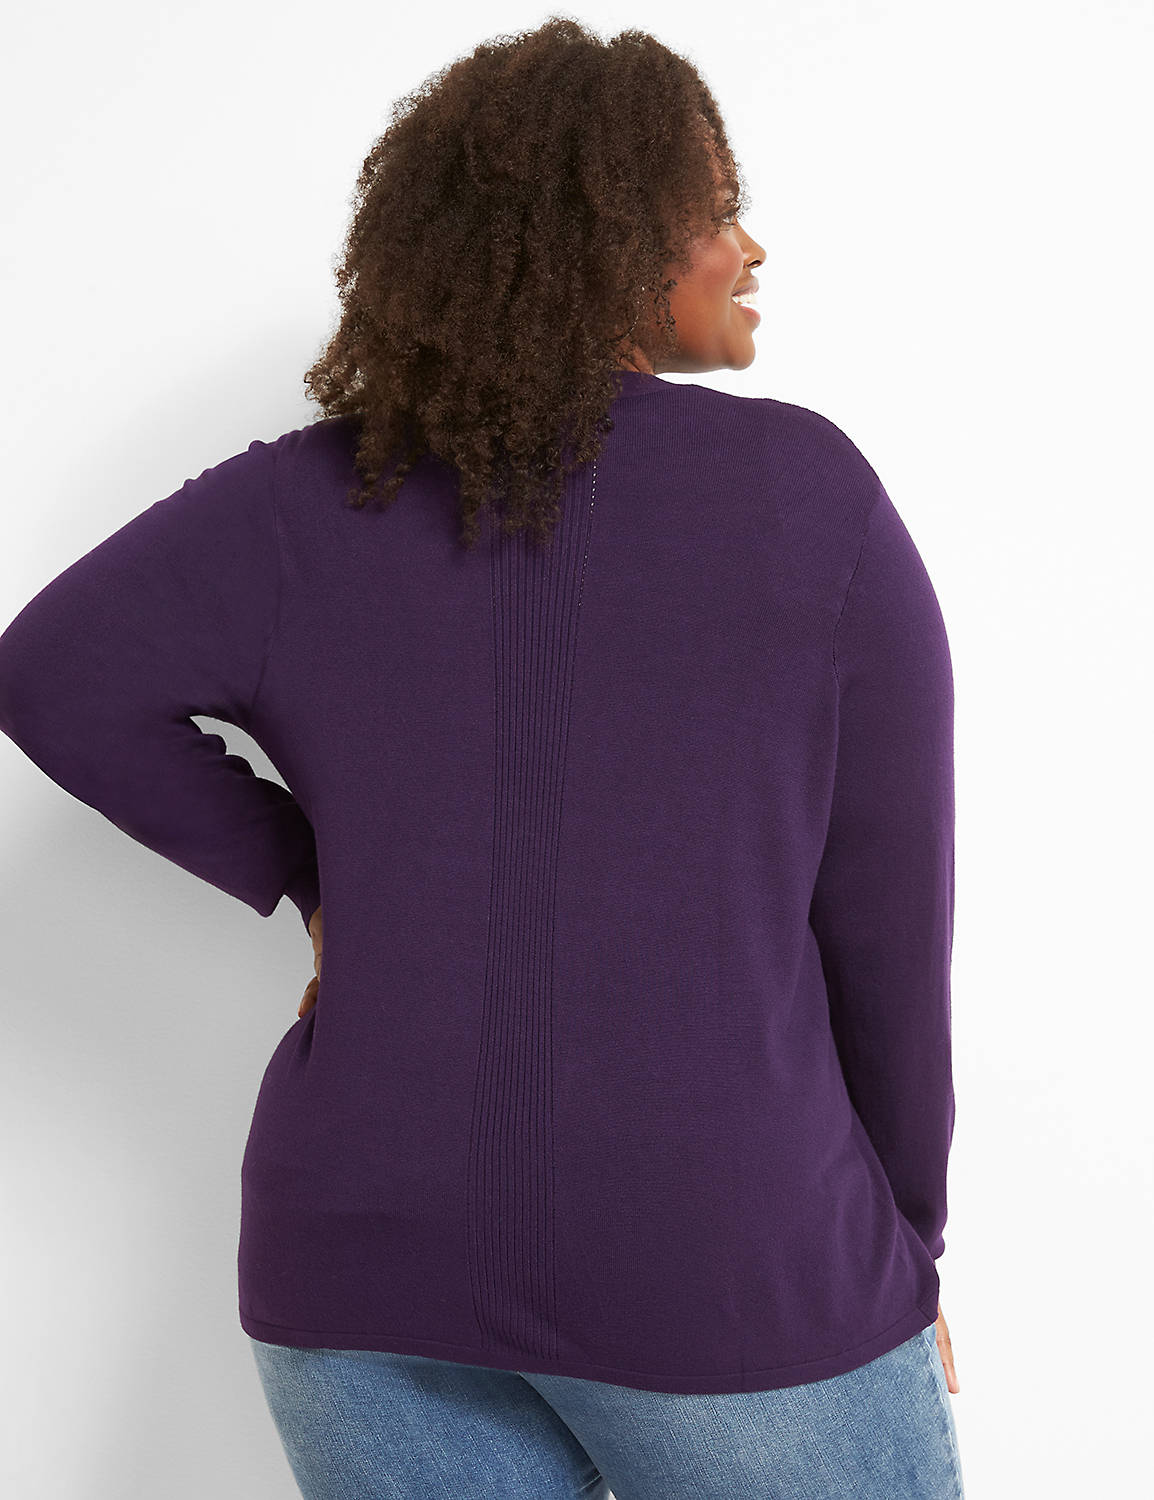 Ribbed Detail Open-Front Cardigan Product Image 2